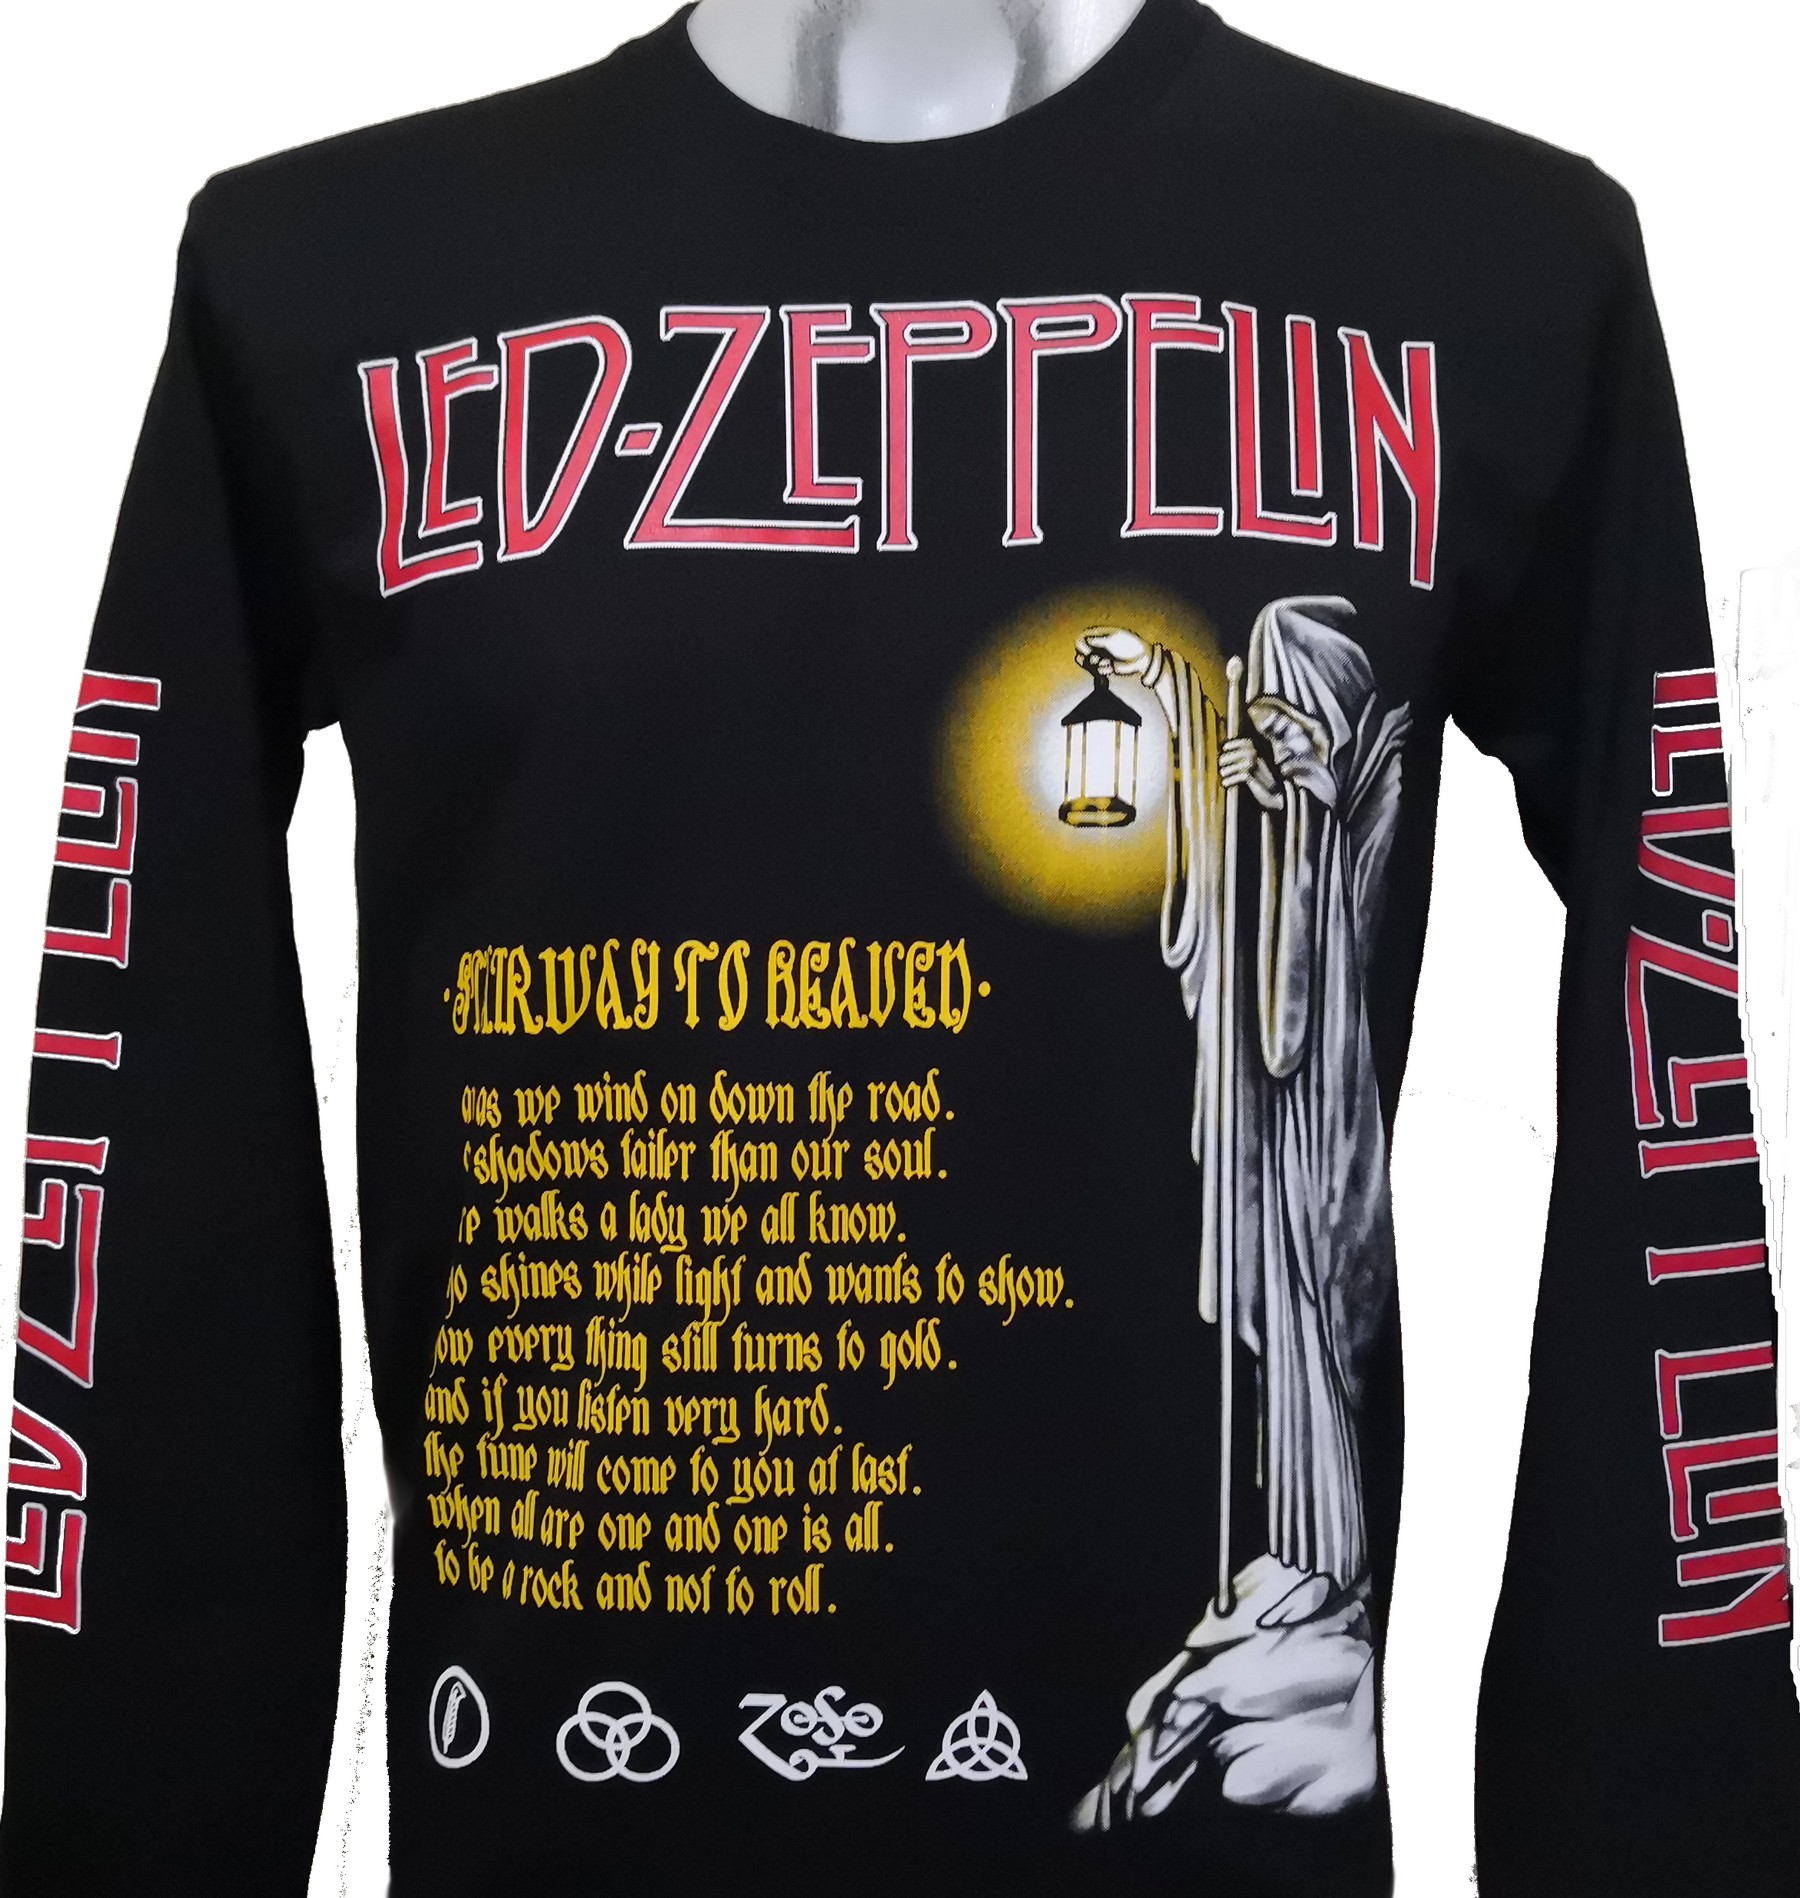 Led Zeppelin long-sleeved t-shirt Stairway to Heaven size L